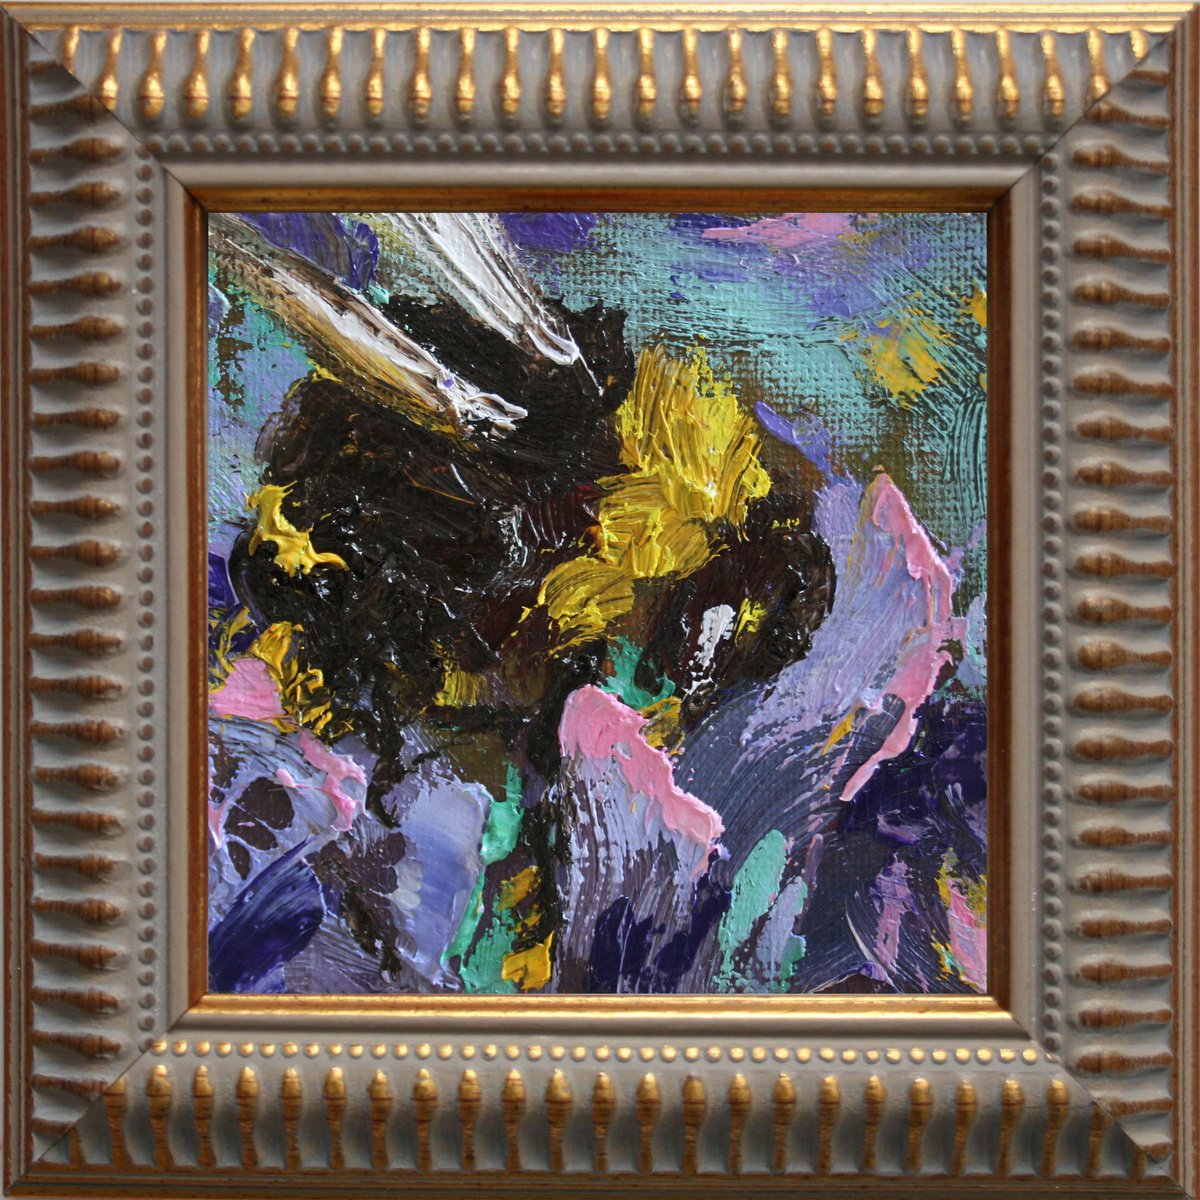 BUMBLEBEE 09 framed / FROM MY SERIES MINI PICTURE / ORIGINAL PAINTING by Salana Art Gallery